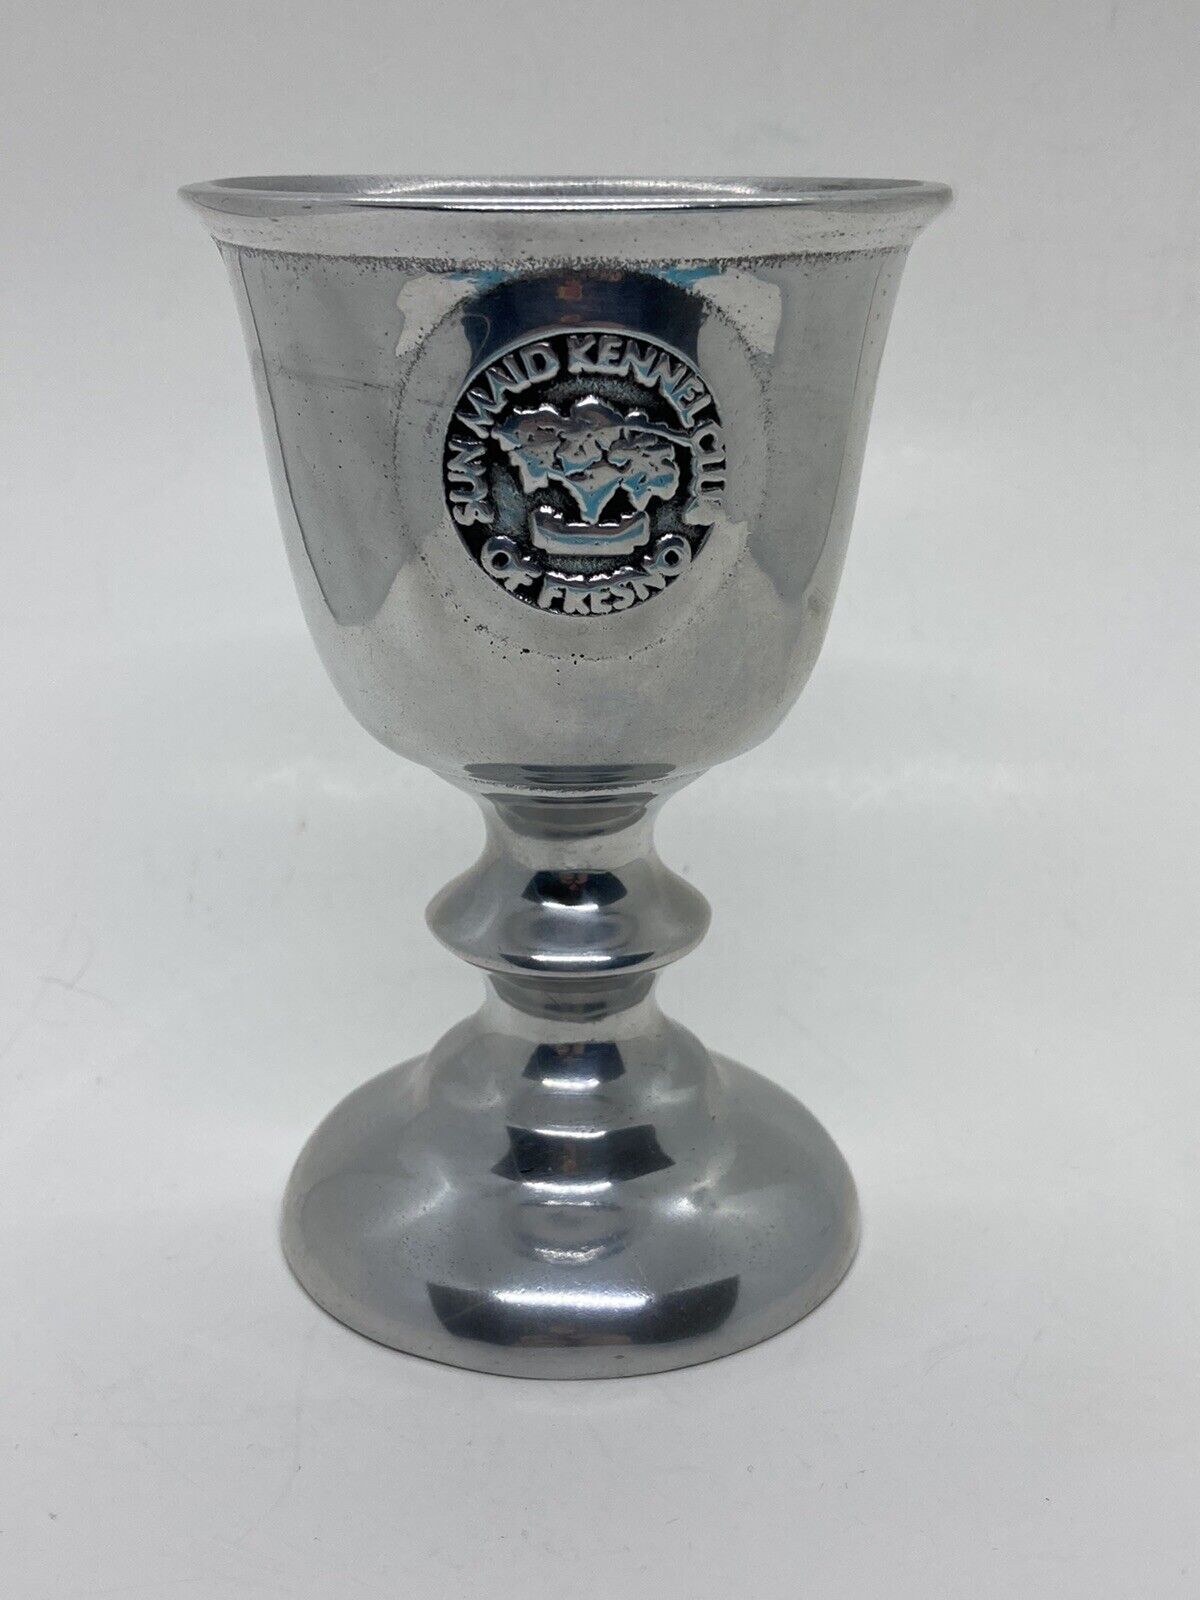 Vintage 1940s Sun Maid Kennel Club Chalice Cup Wilton Pewter Ware USA Rare 25